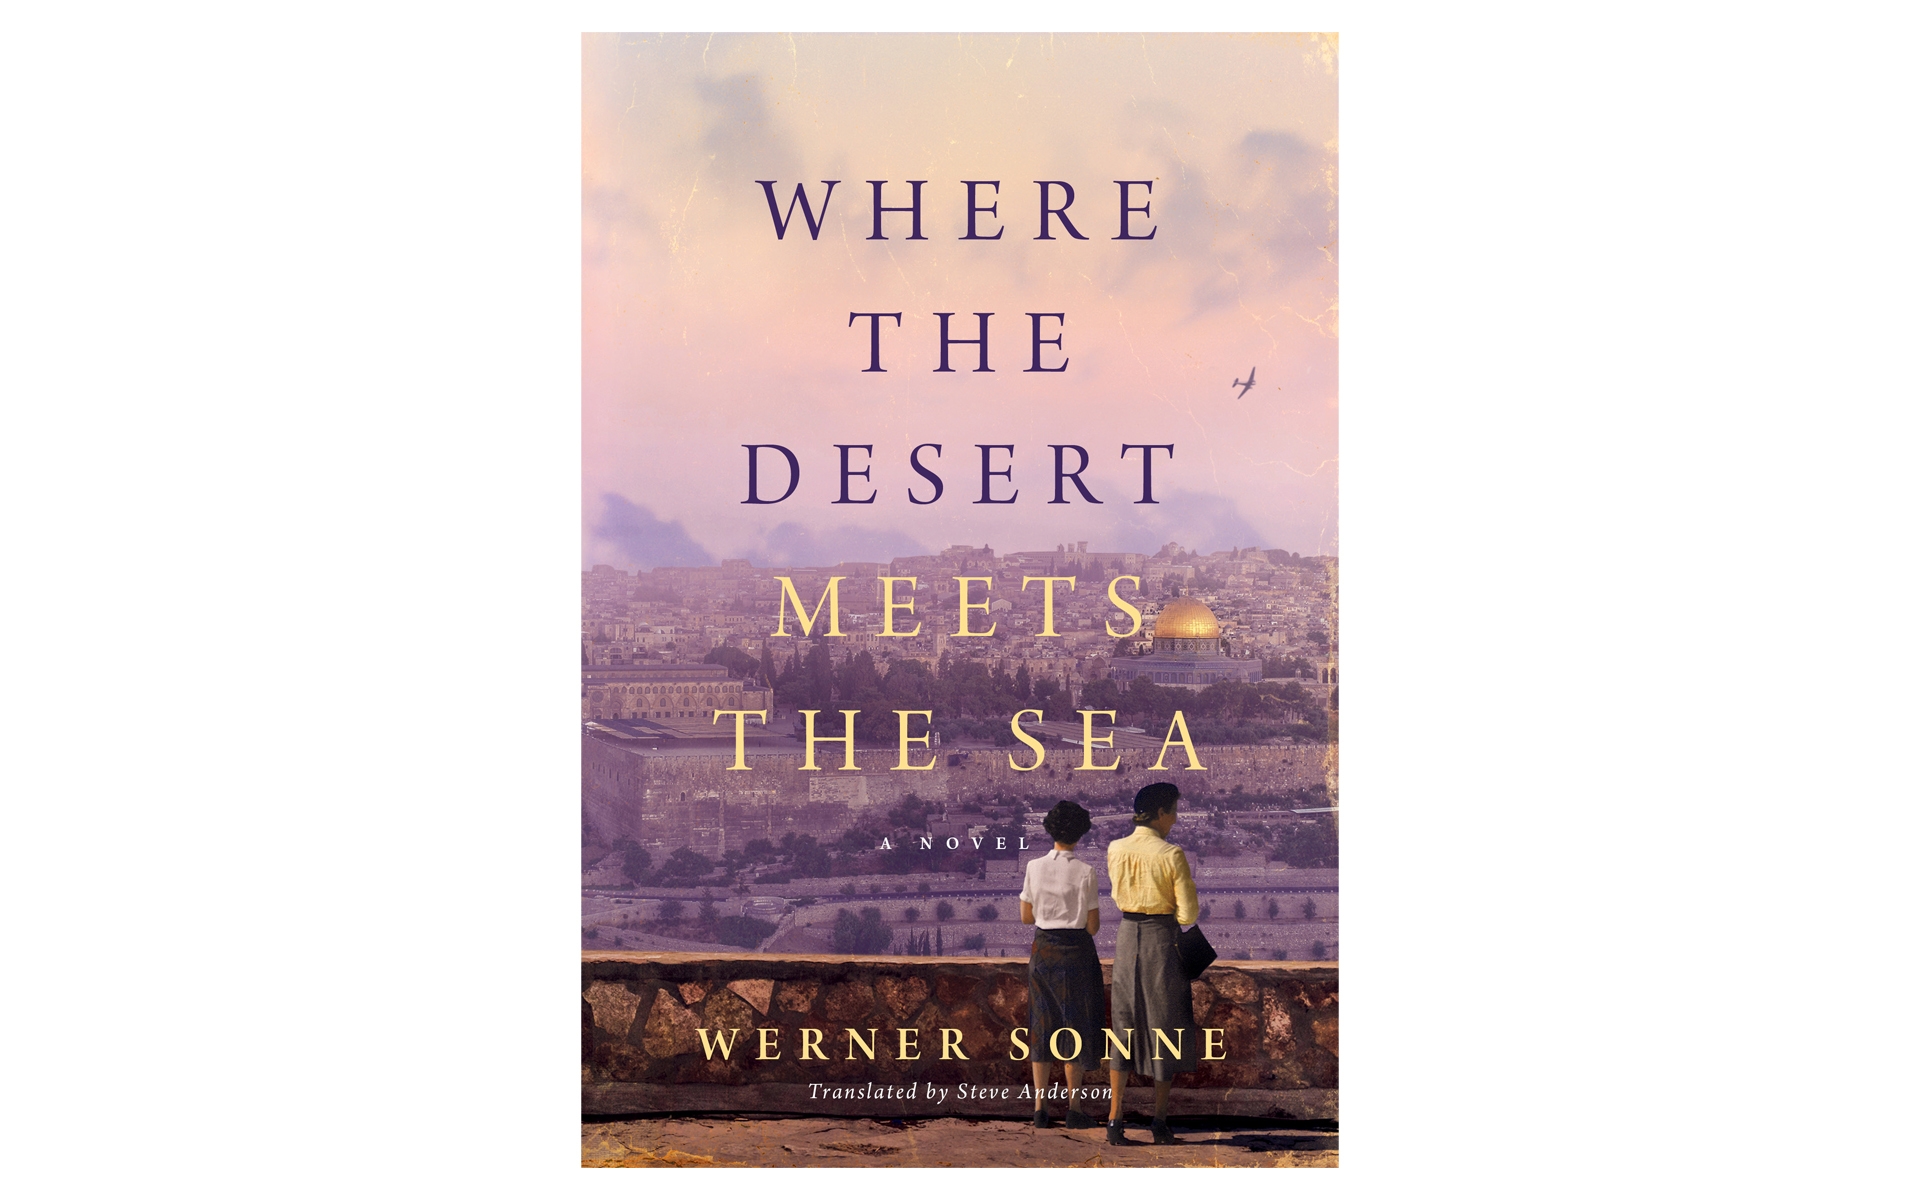 The cover art for the book "Where the desert meets the sea" 